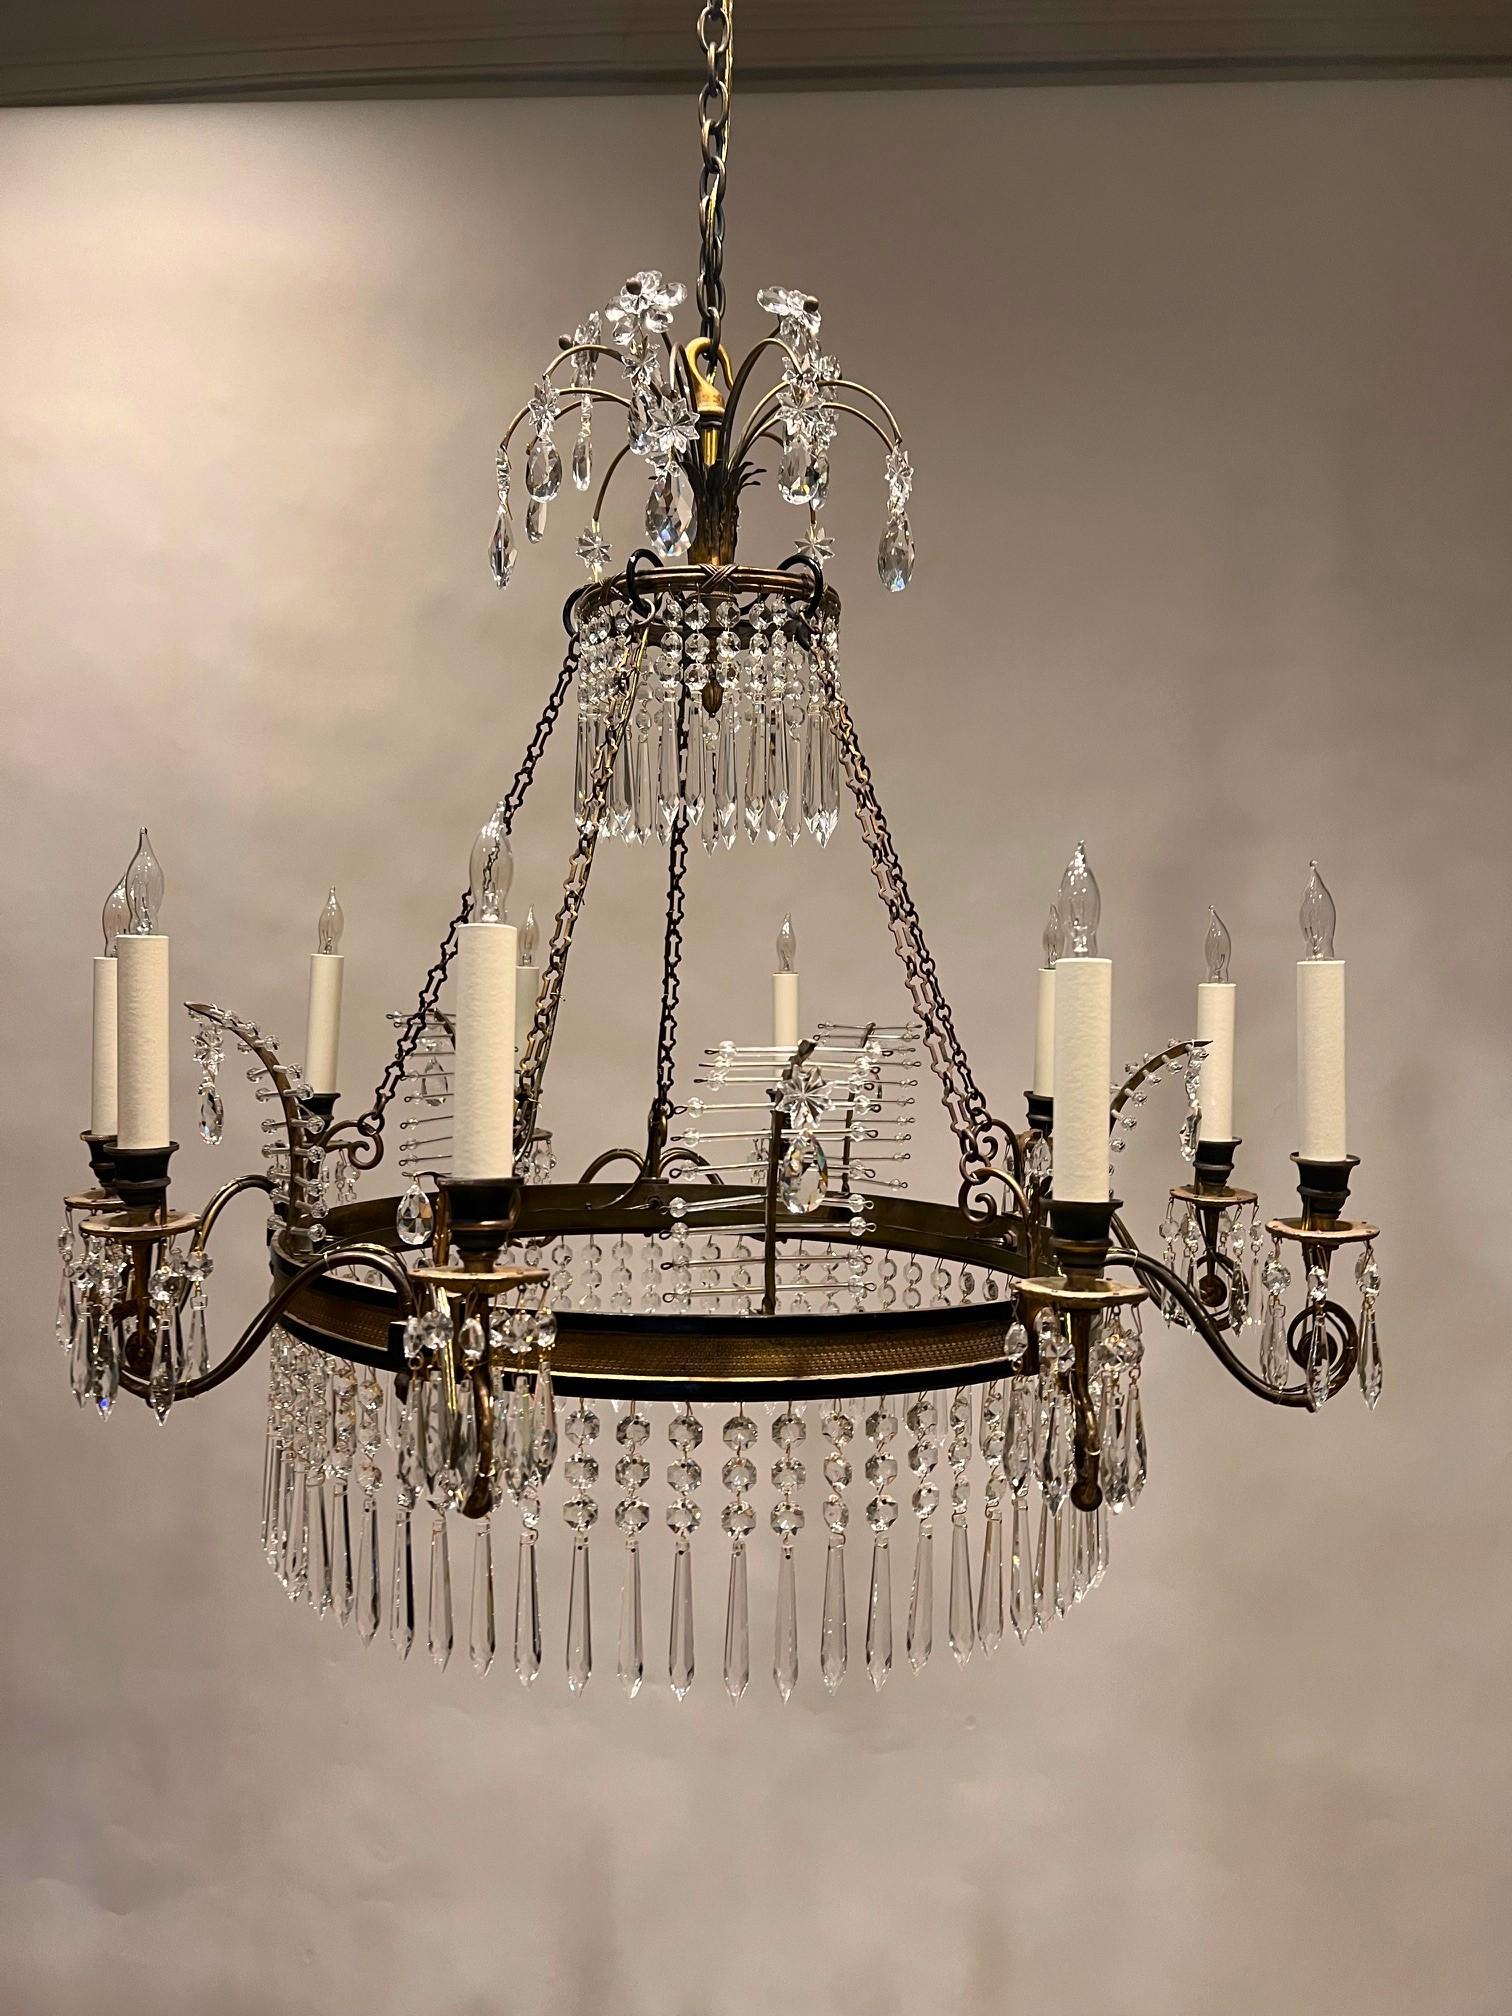 This elegant Neo-Classic 10-light chandelier, though made in Italy, is inspired by Regency England. The bronze and patinated bronze frame was put together from hand-cast components. 
The hand-cut prisms are French.  The floral crown, crystal fern